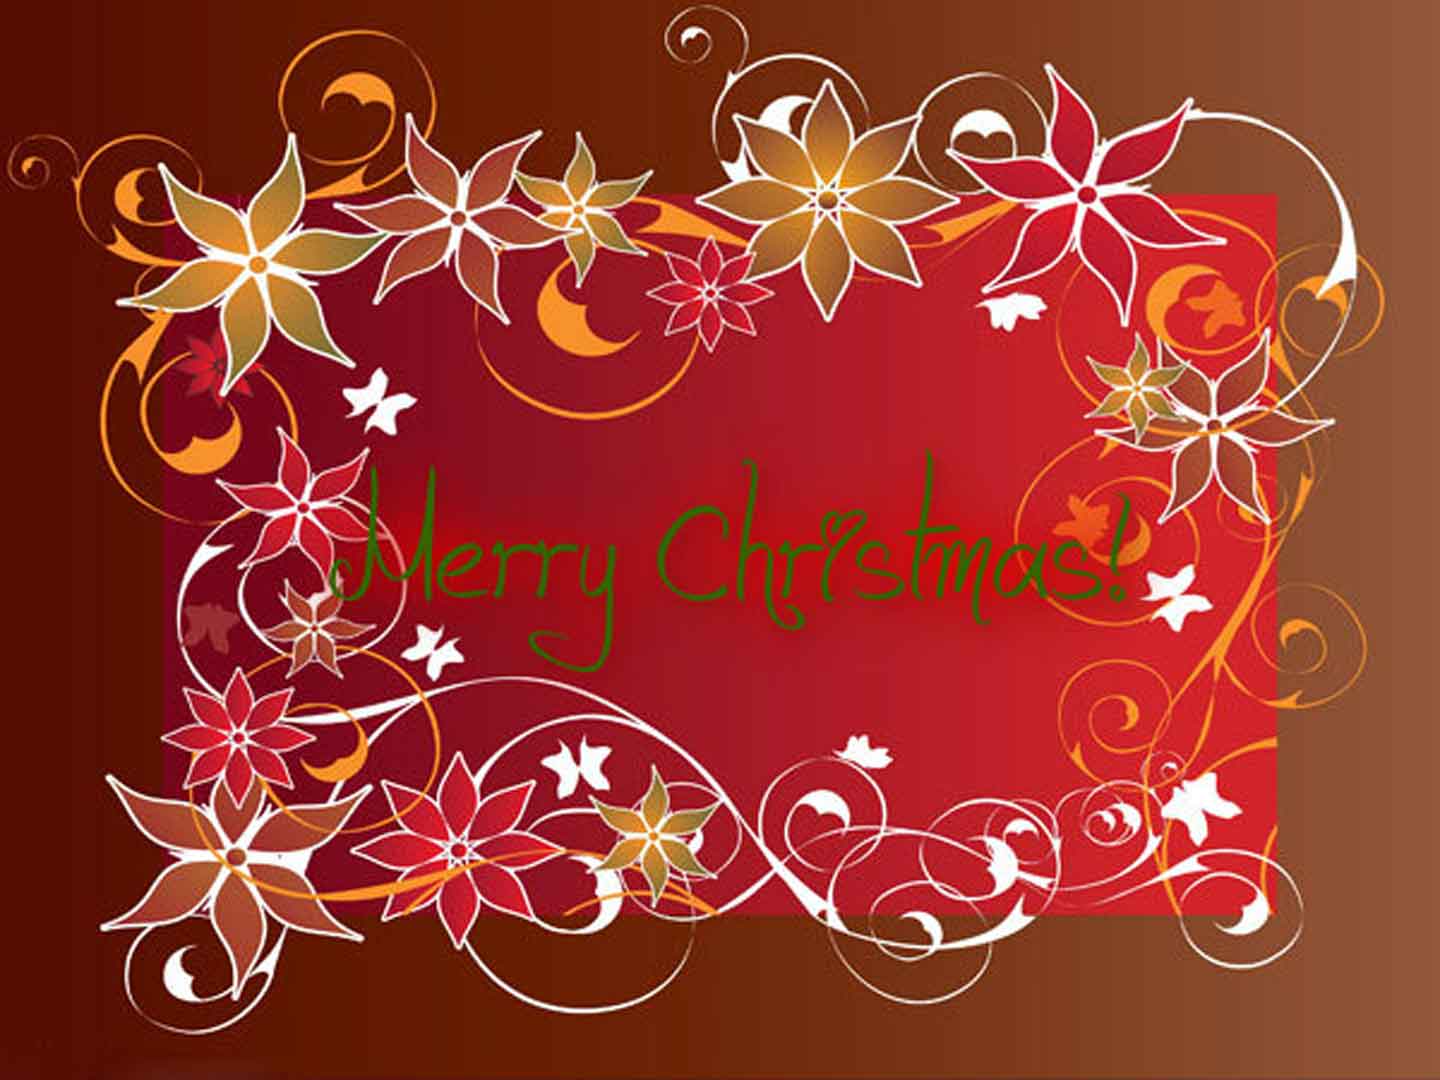 ... Greetings Card & Wallpapers Free: Merry Christmas Greeting Cards Free